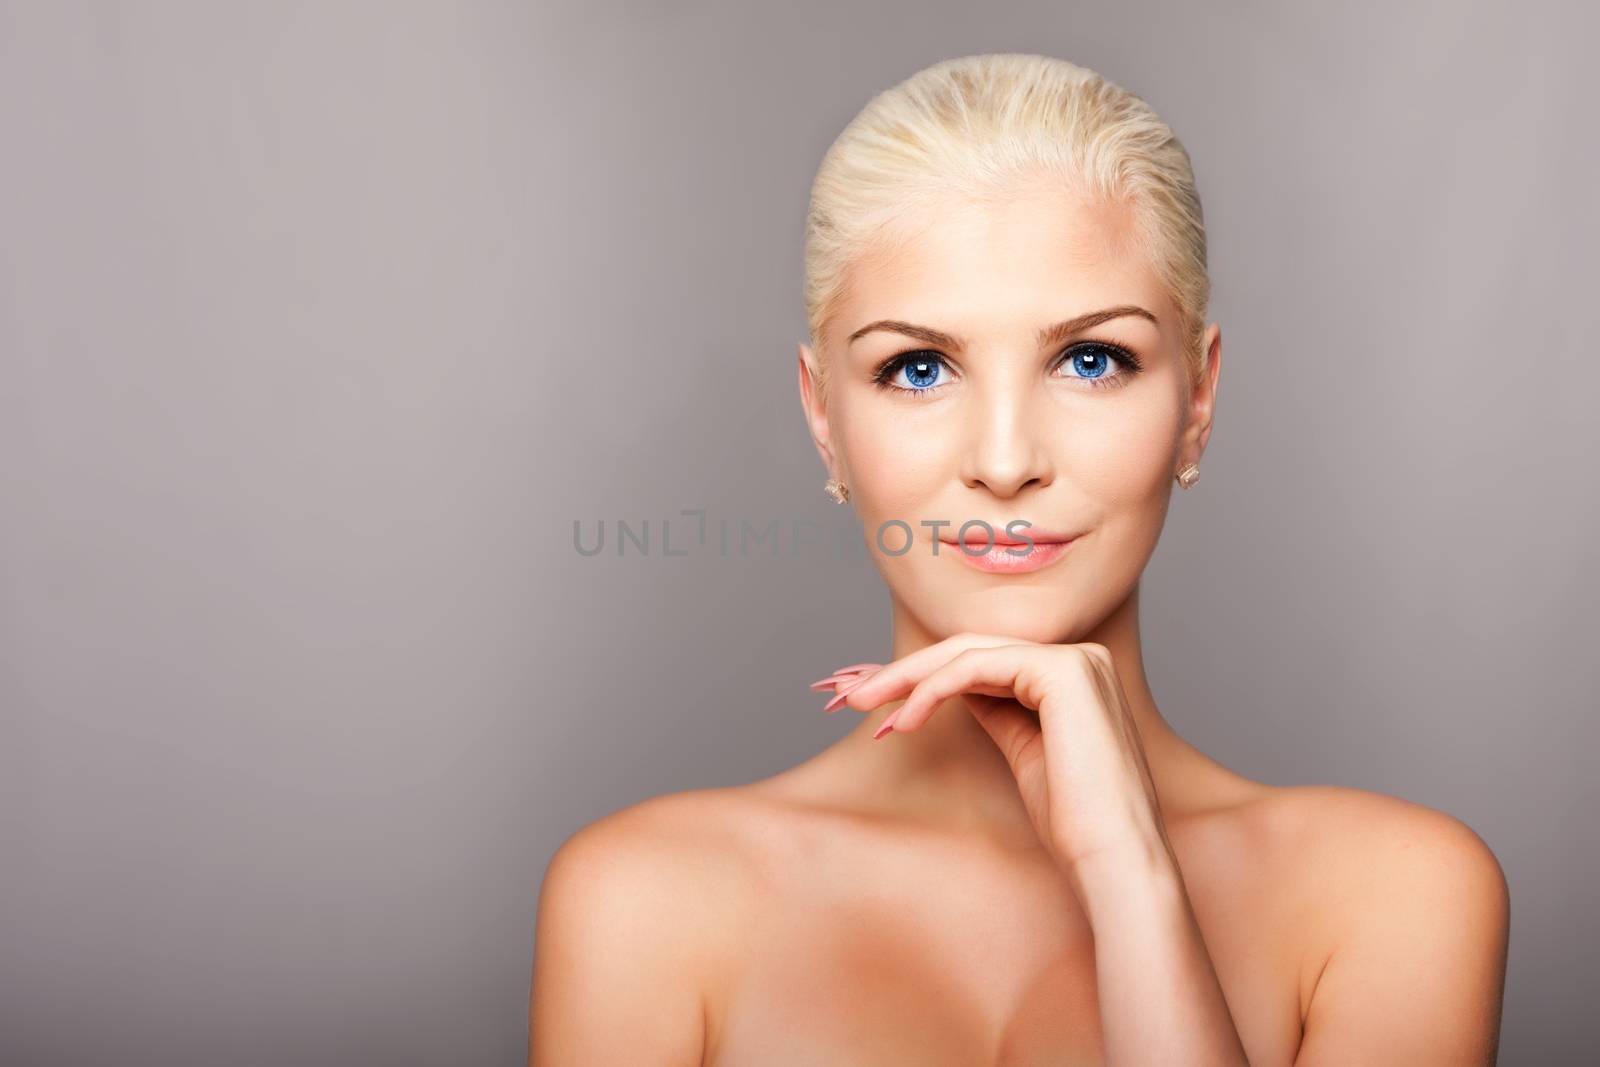 Beauty portrait face of happy smiling beautiful blond woman with blue eyes and smooth skin, aesthetics cosmetics skincare concept.